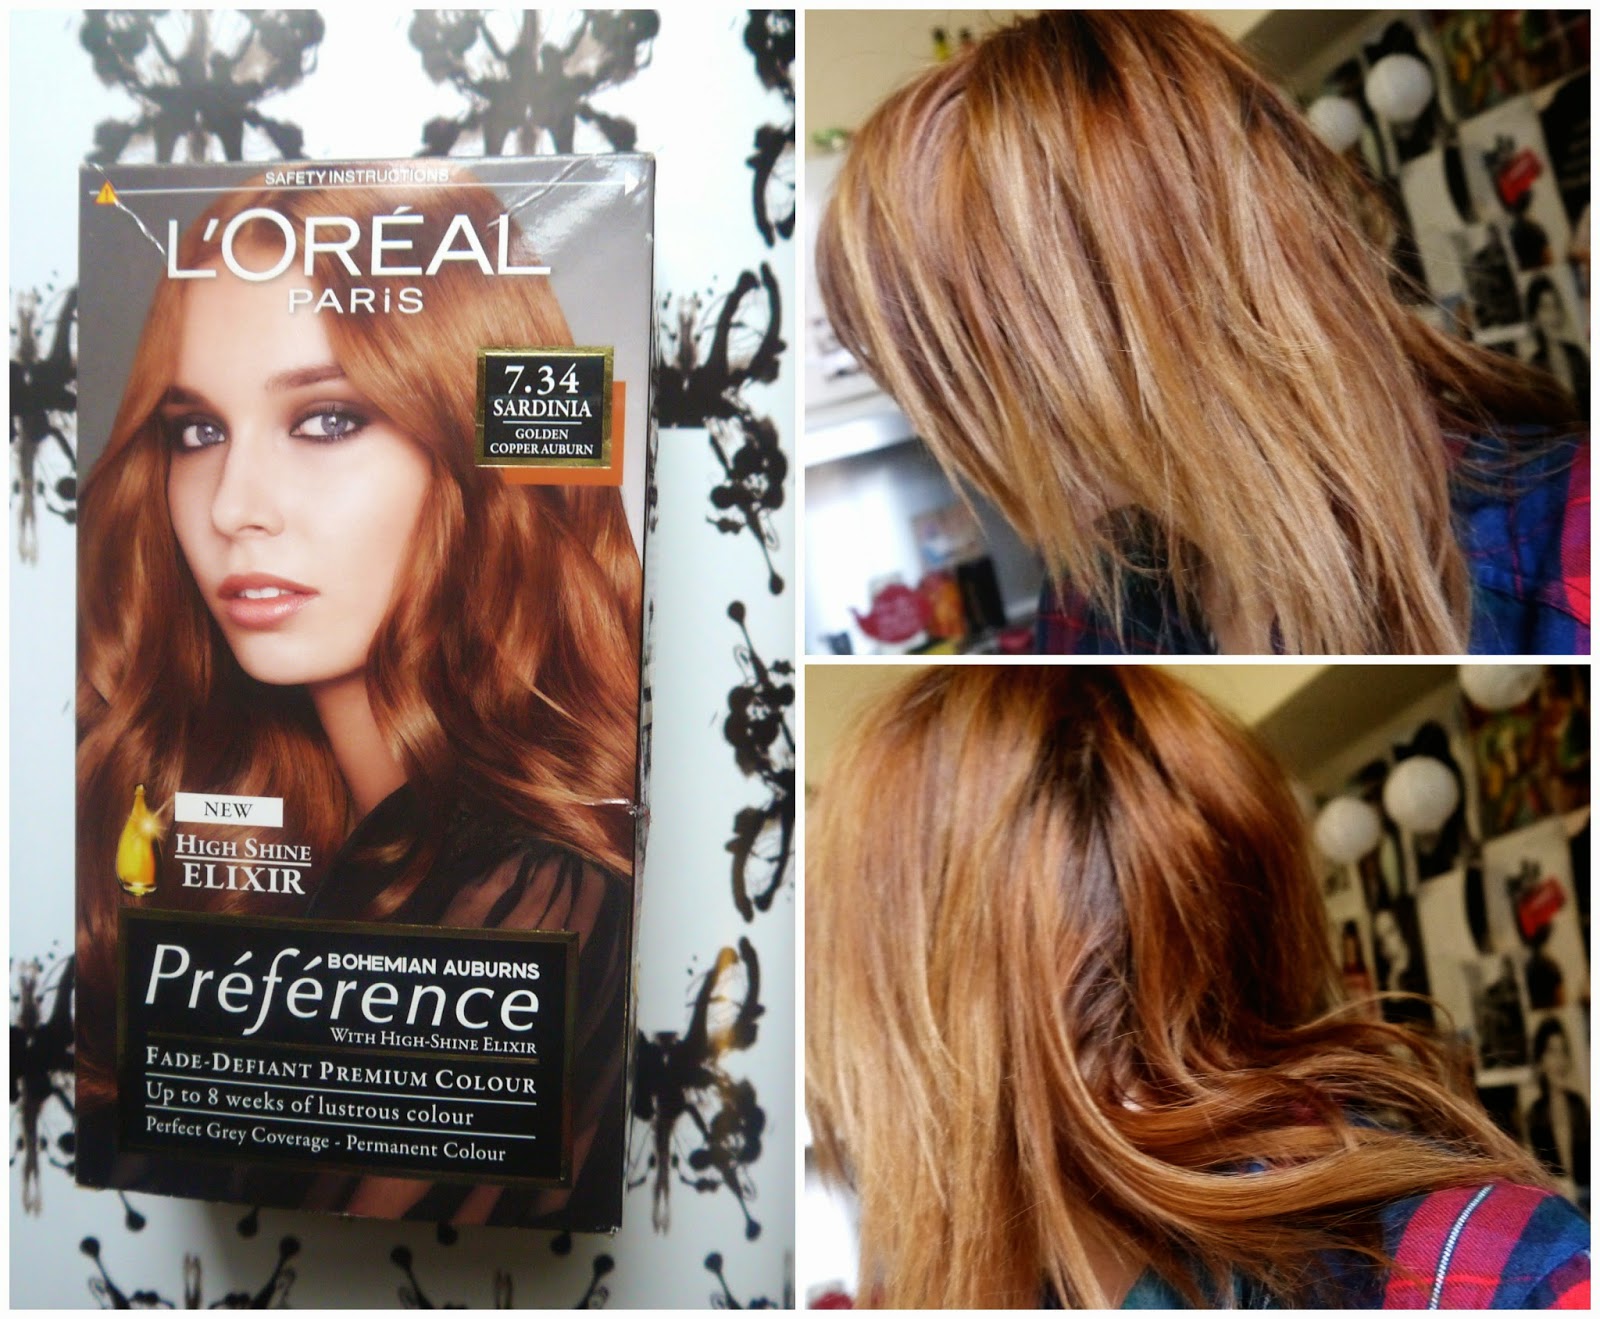 Loreal Preference Hair Colour Reviews - Best Hair Color 2017